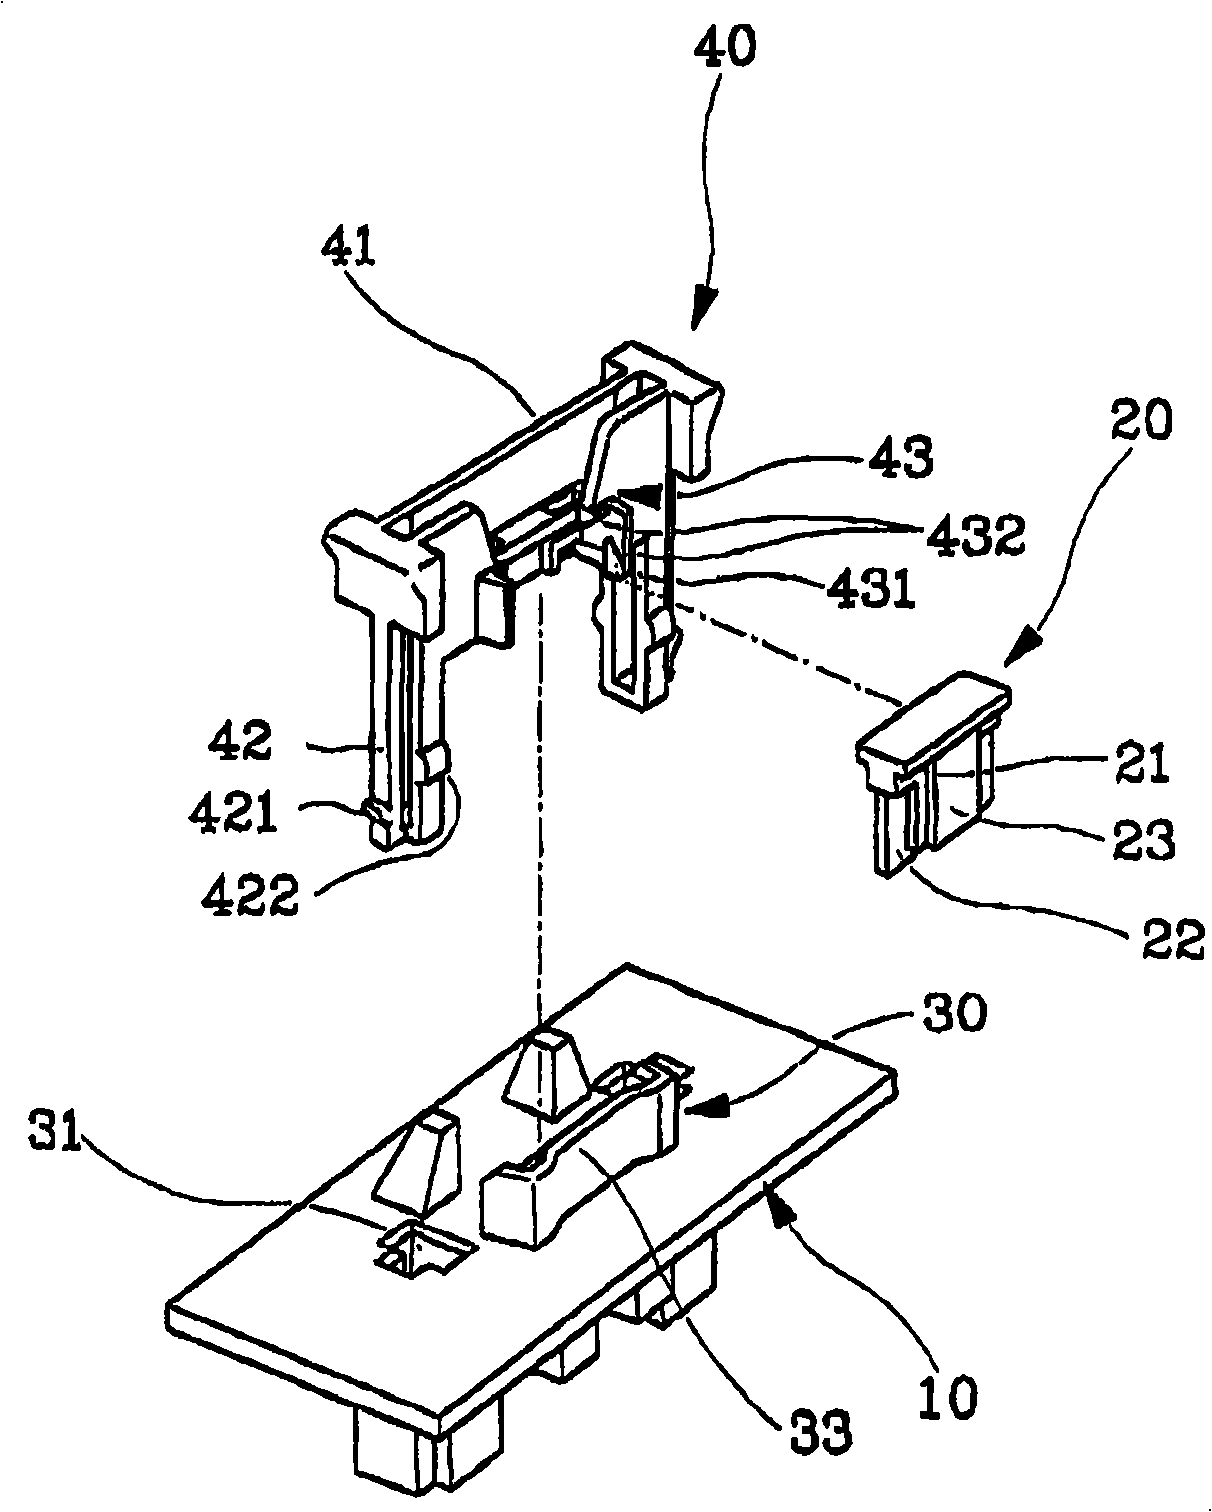 Fastening device for low-profile fuses of vehicle